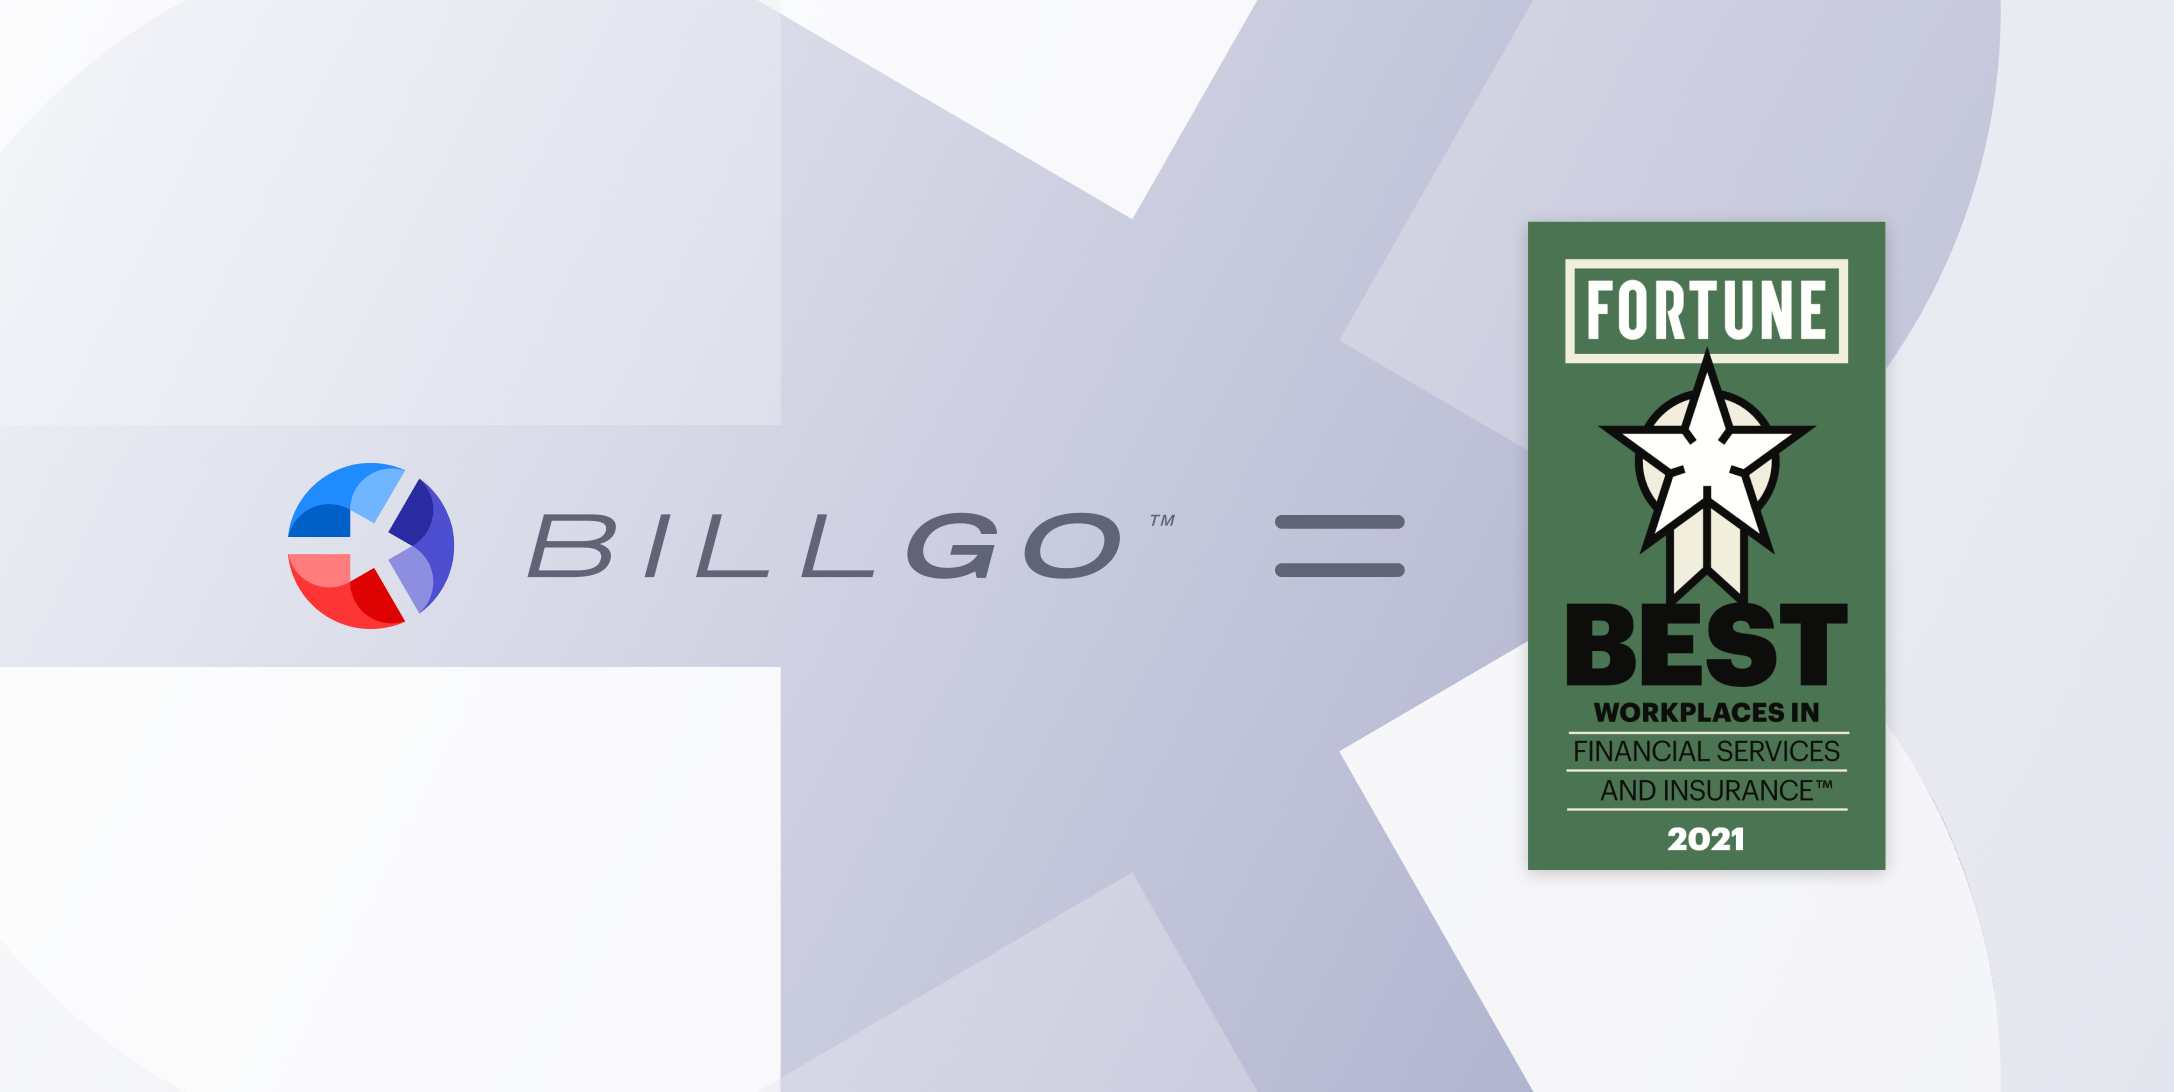 Fortune Names BillGO a “Best Place to Work” in Financial Services